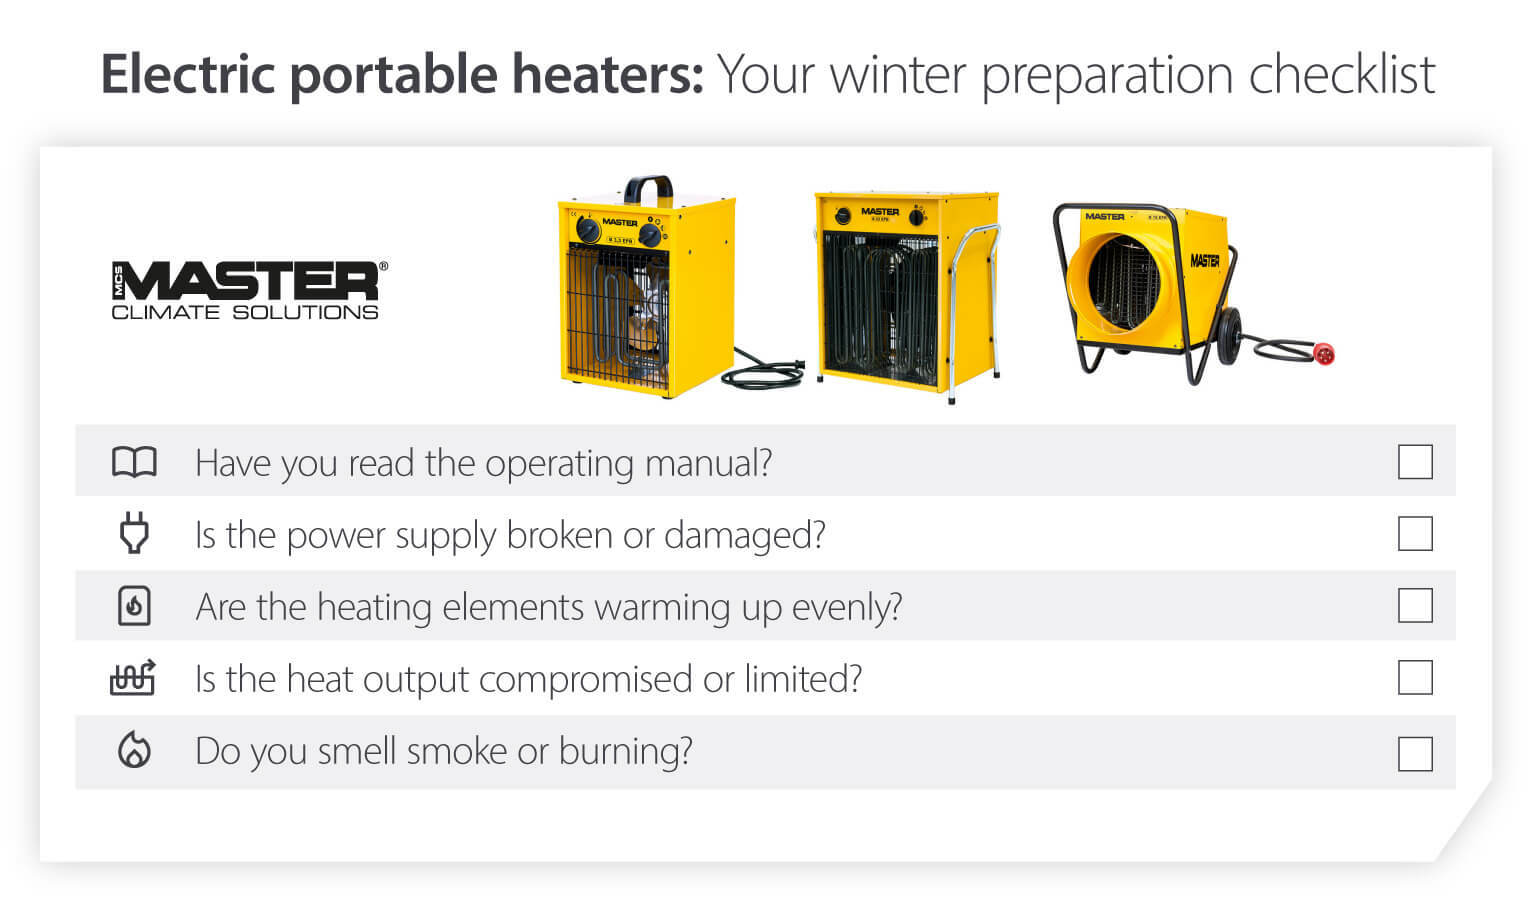 Winter checklist for portable electric heaters - preparing heater for cold temperatures - Infographic image